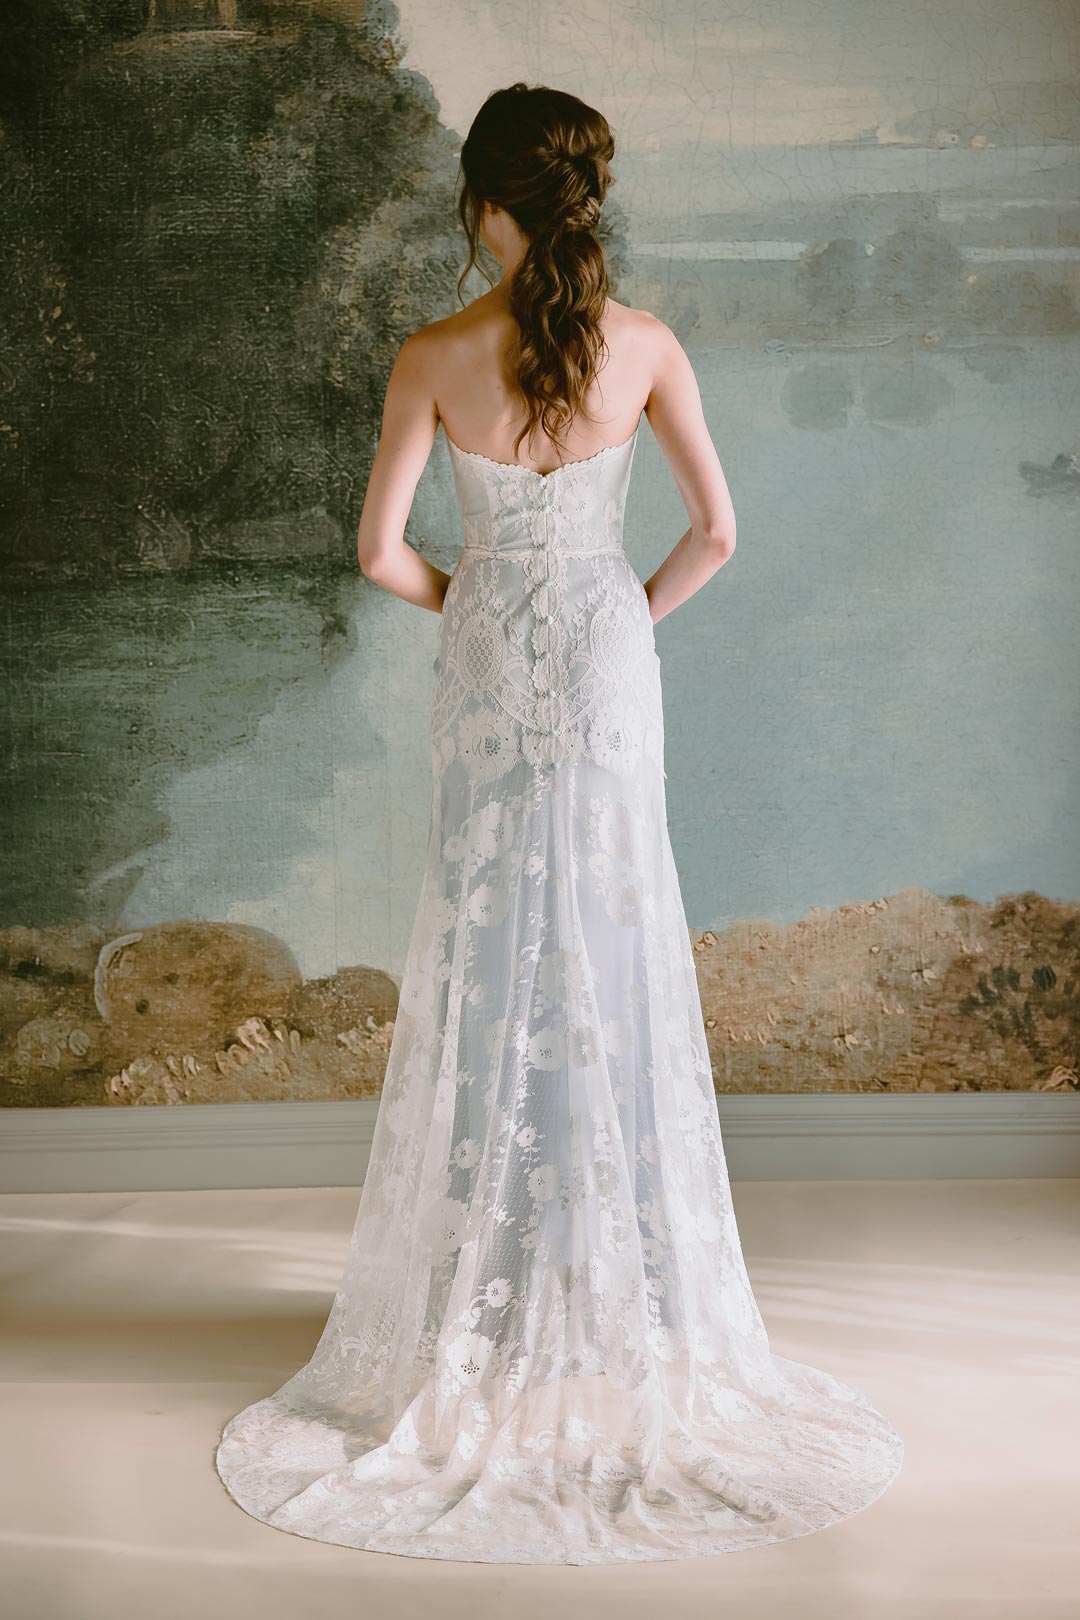 Button Baclk Lace Wedding Dress Eloise with blue Silk layer by Claire Pettibone